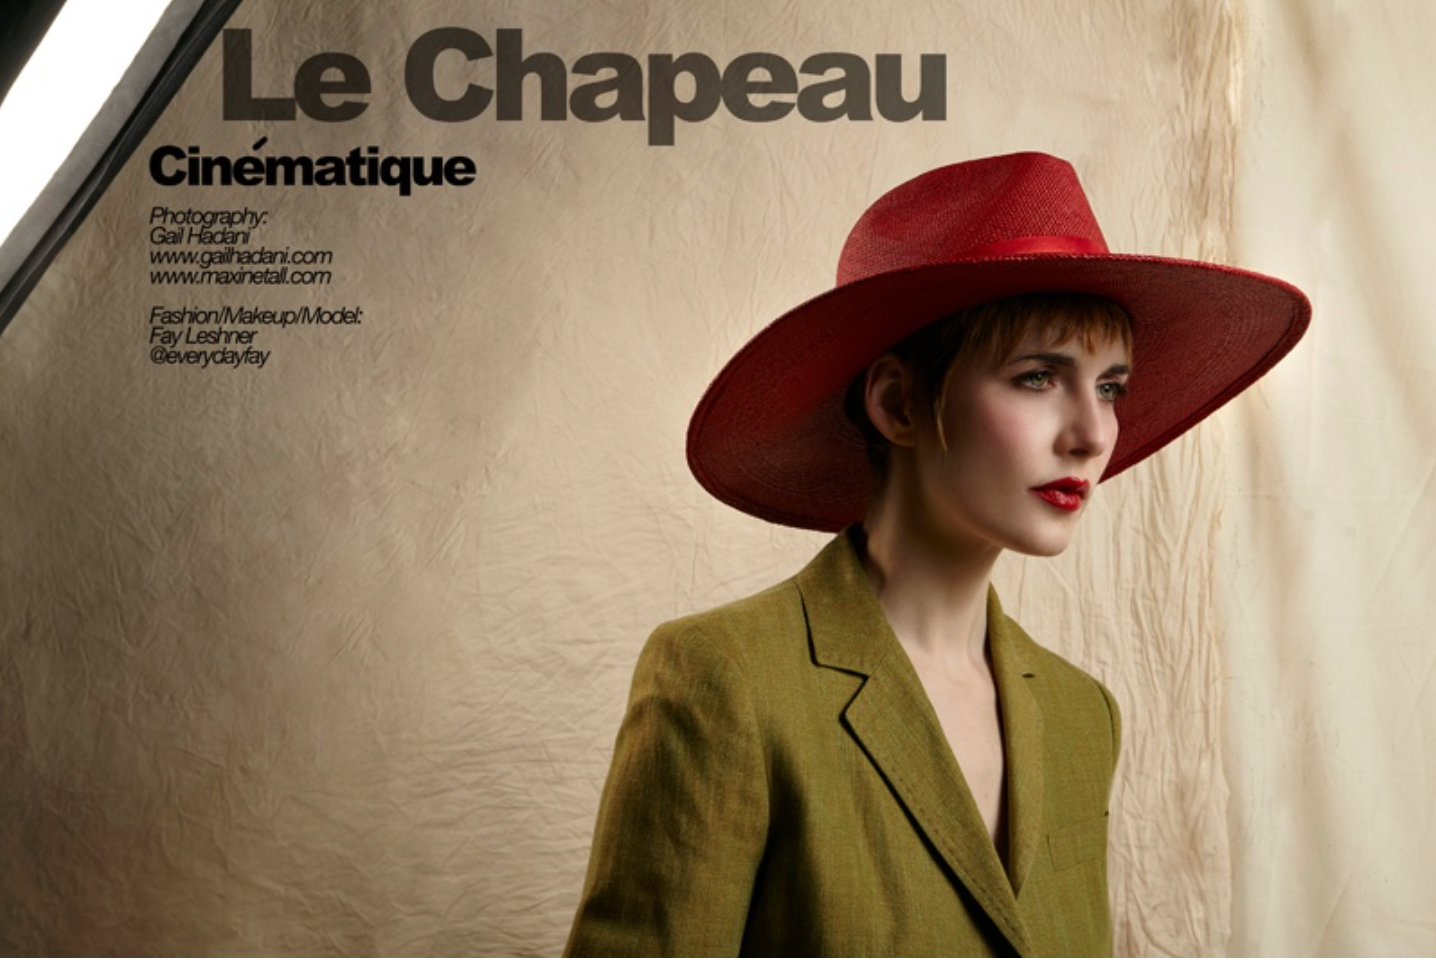 Cha Cha's House of Ill Repute featured in Le Chapeau Cinématique